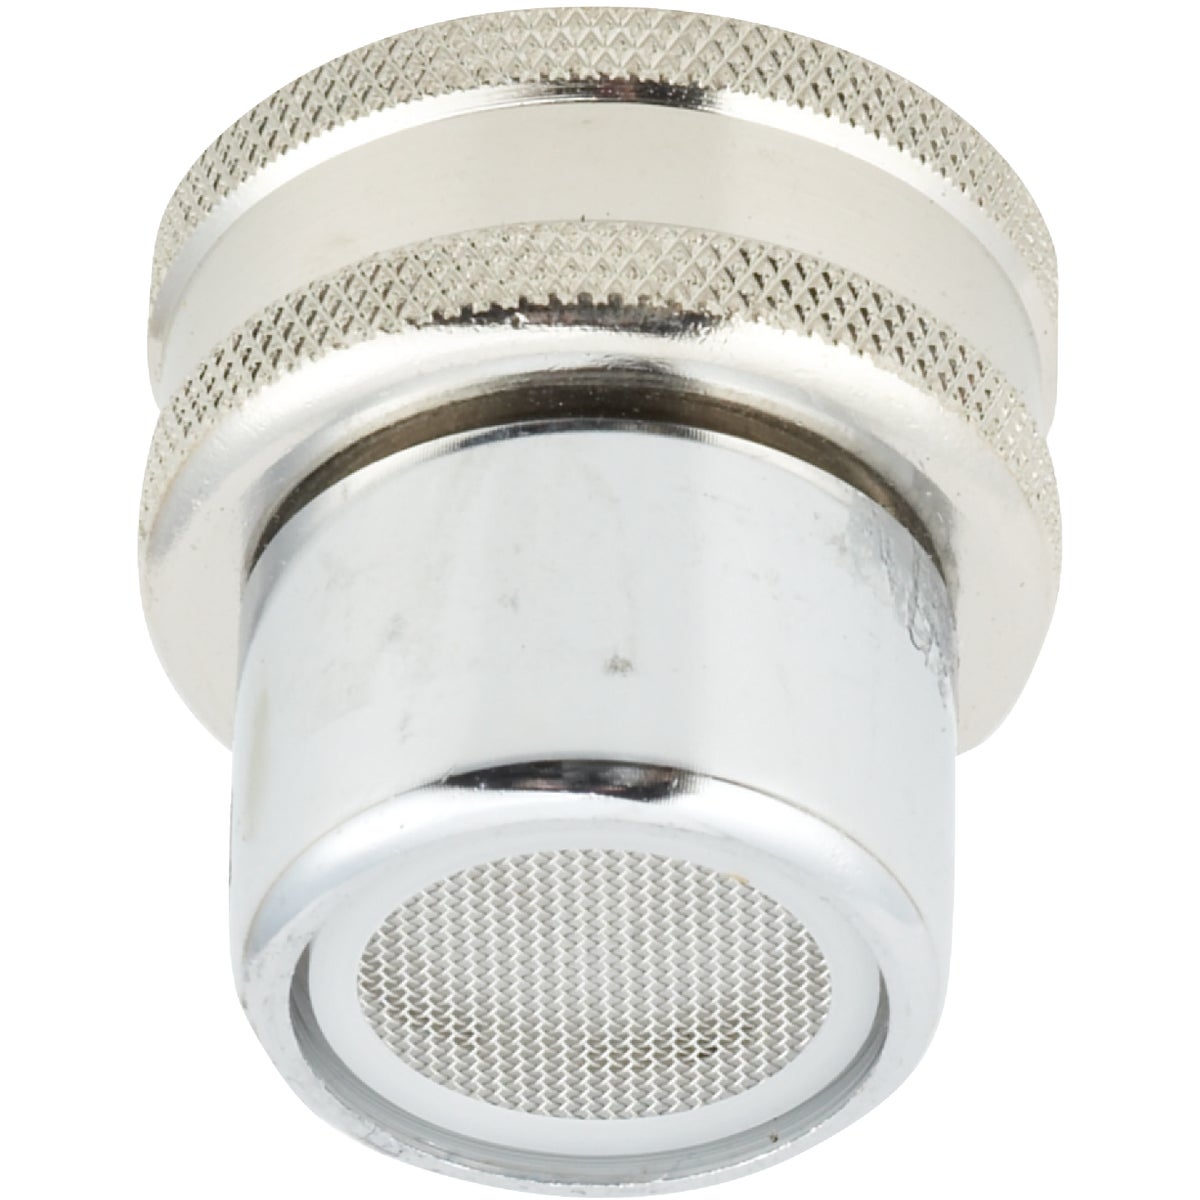 Item 456811, Fits faucets with 3/4" outside hose threads. Brass, chrome-plated.